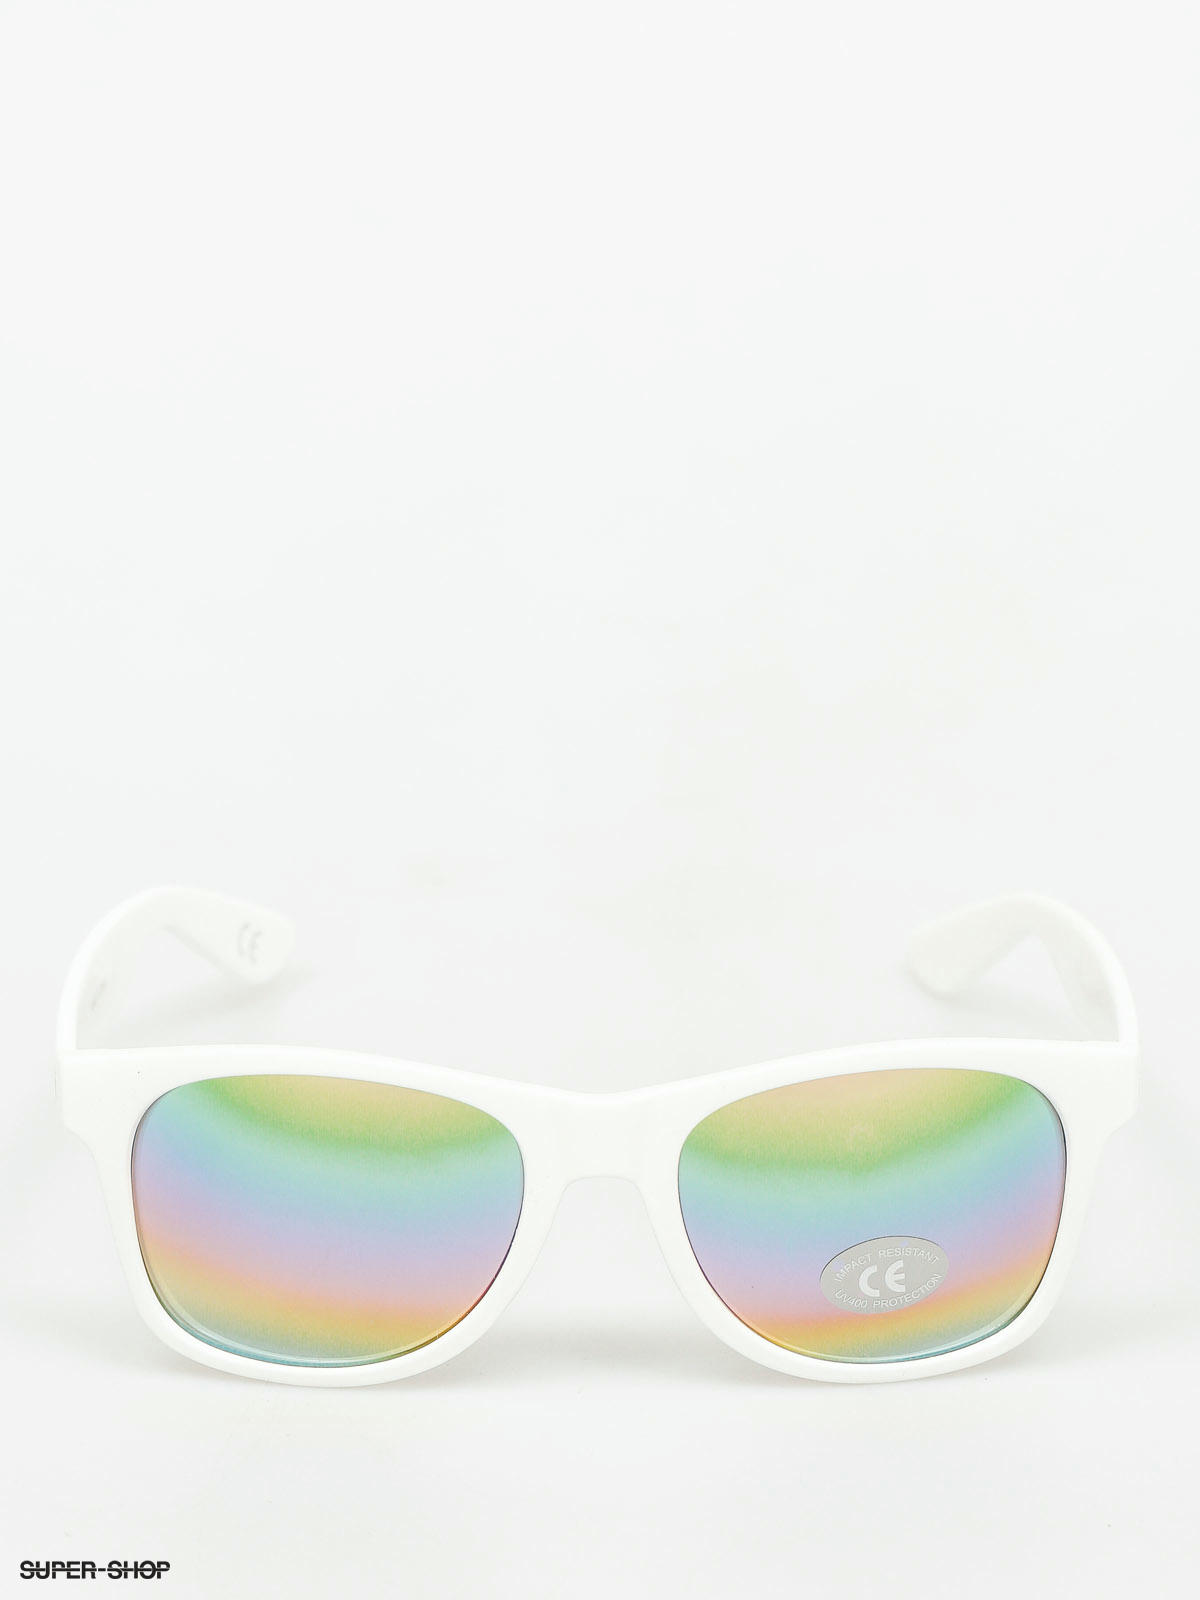 Red Frame Goggles Rainbow Mirror Lens